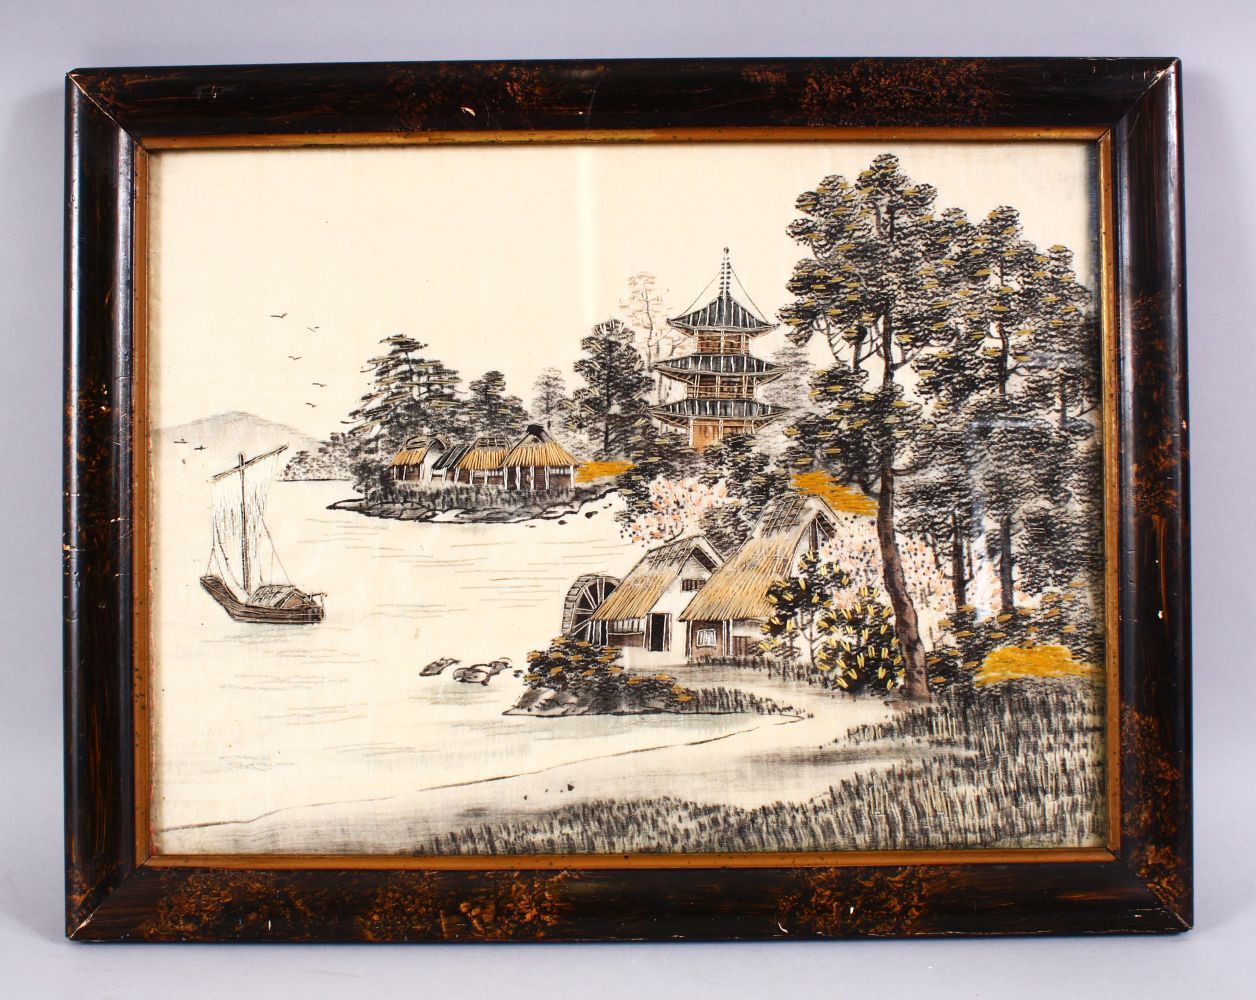 A 20TH CENTURY JAPANESE EMBROIDERED NEEDLE WORK PICTURE OF A LANDSCAPE. 45cm x 35cm.